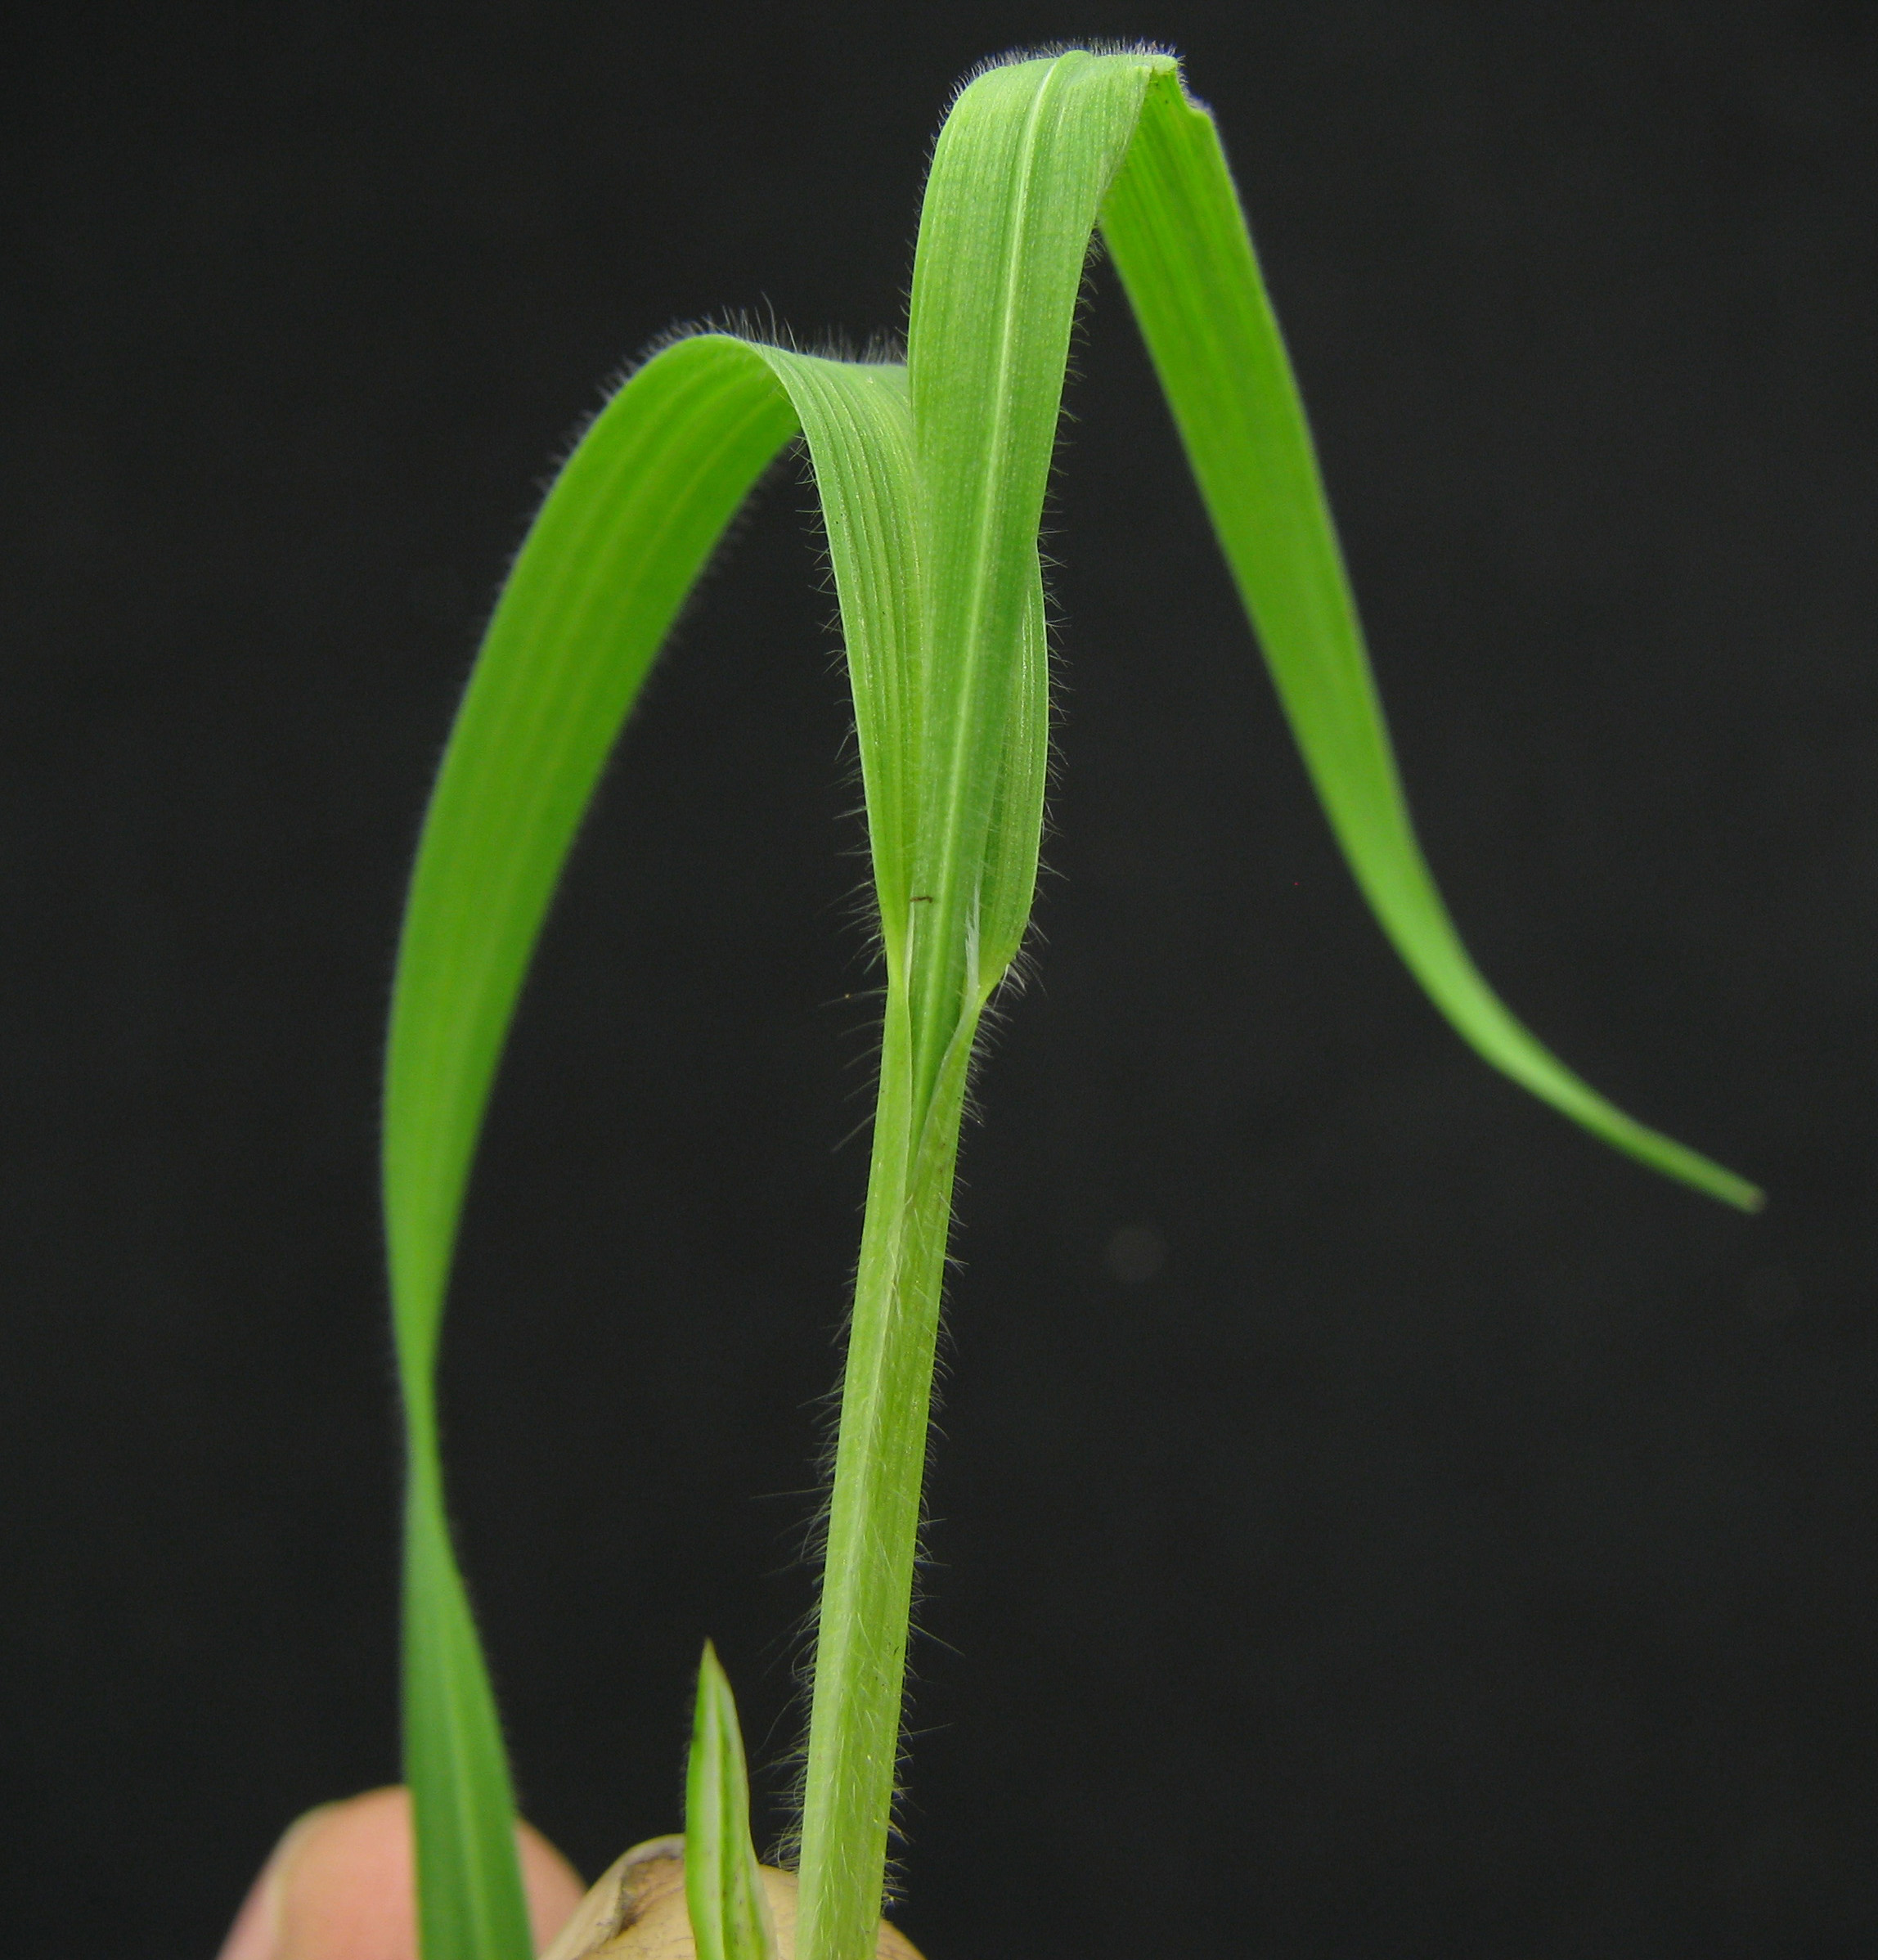 The densely short-haired leaf sheath